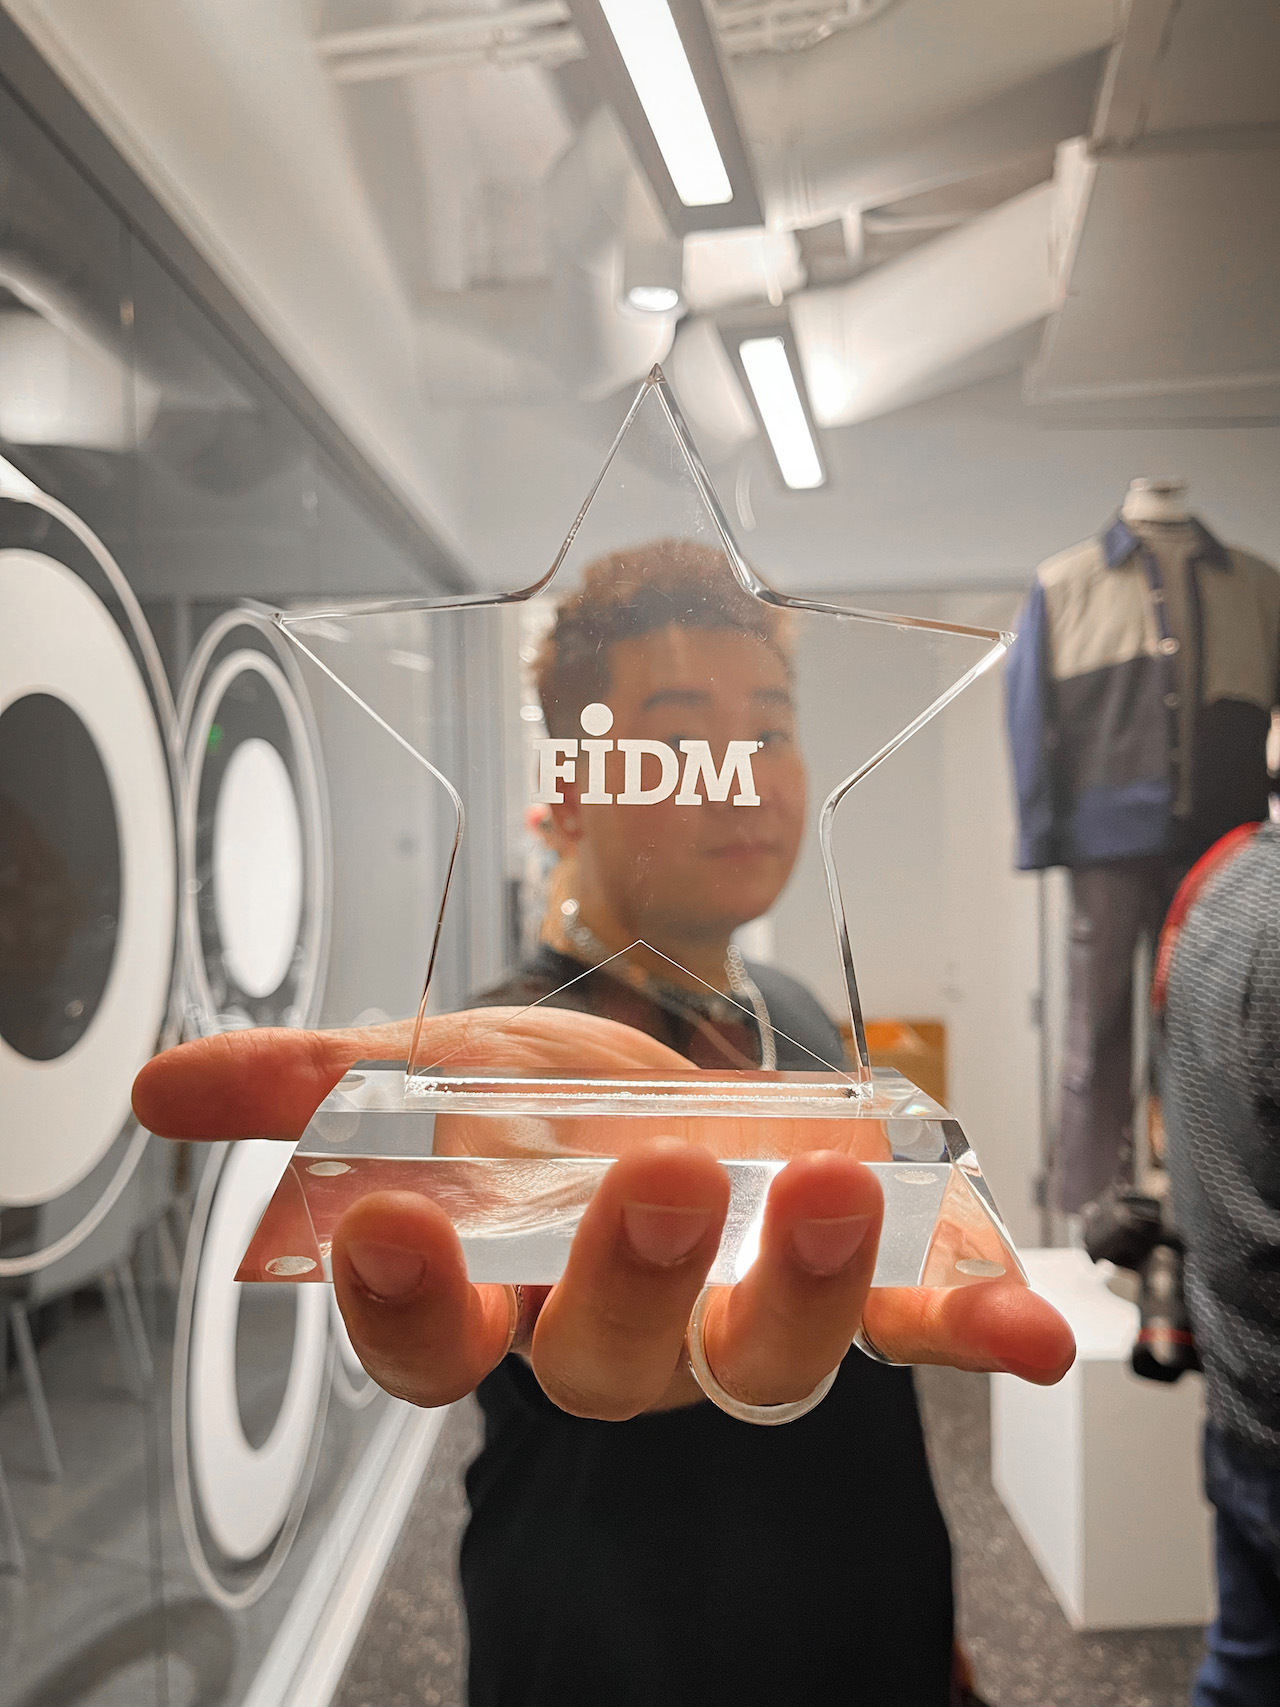 FIDM Grad Colin Huang holds a clear star emblazoned with FIDM to the camera